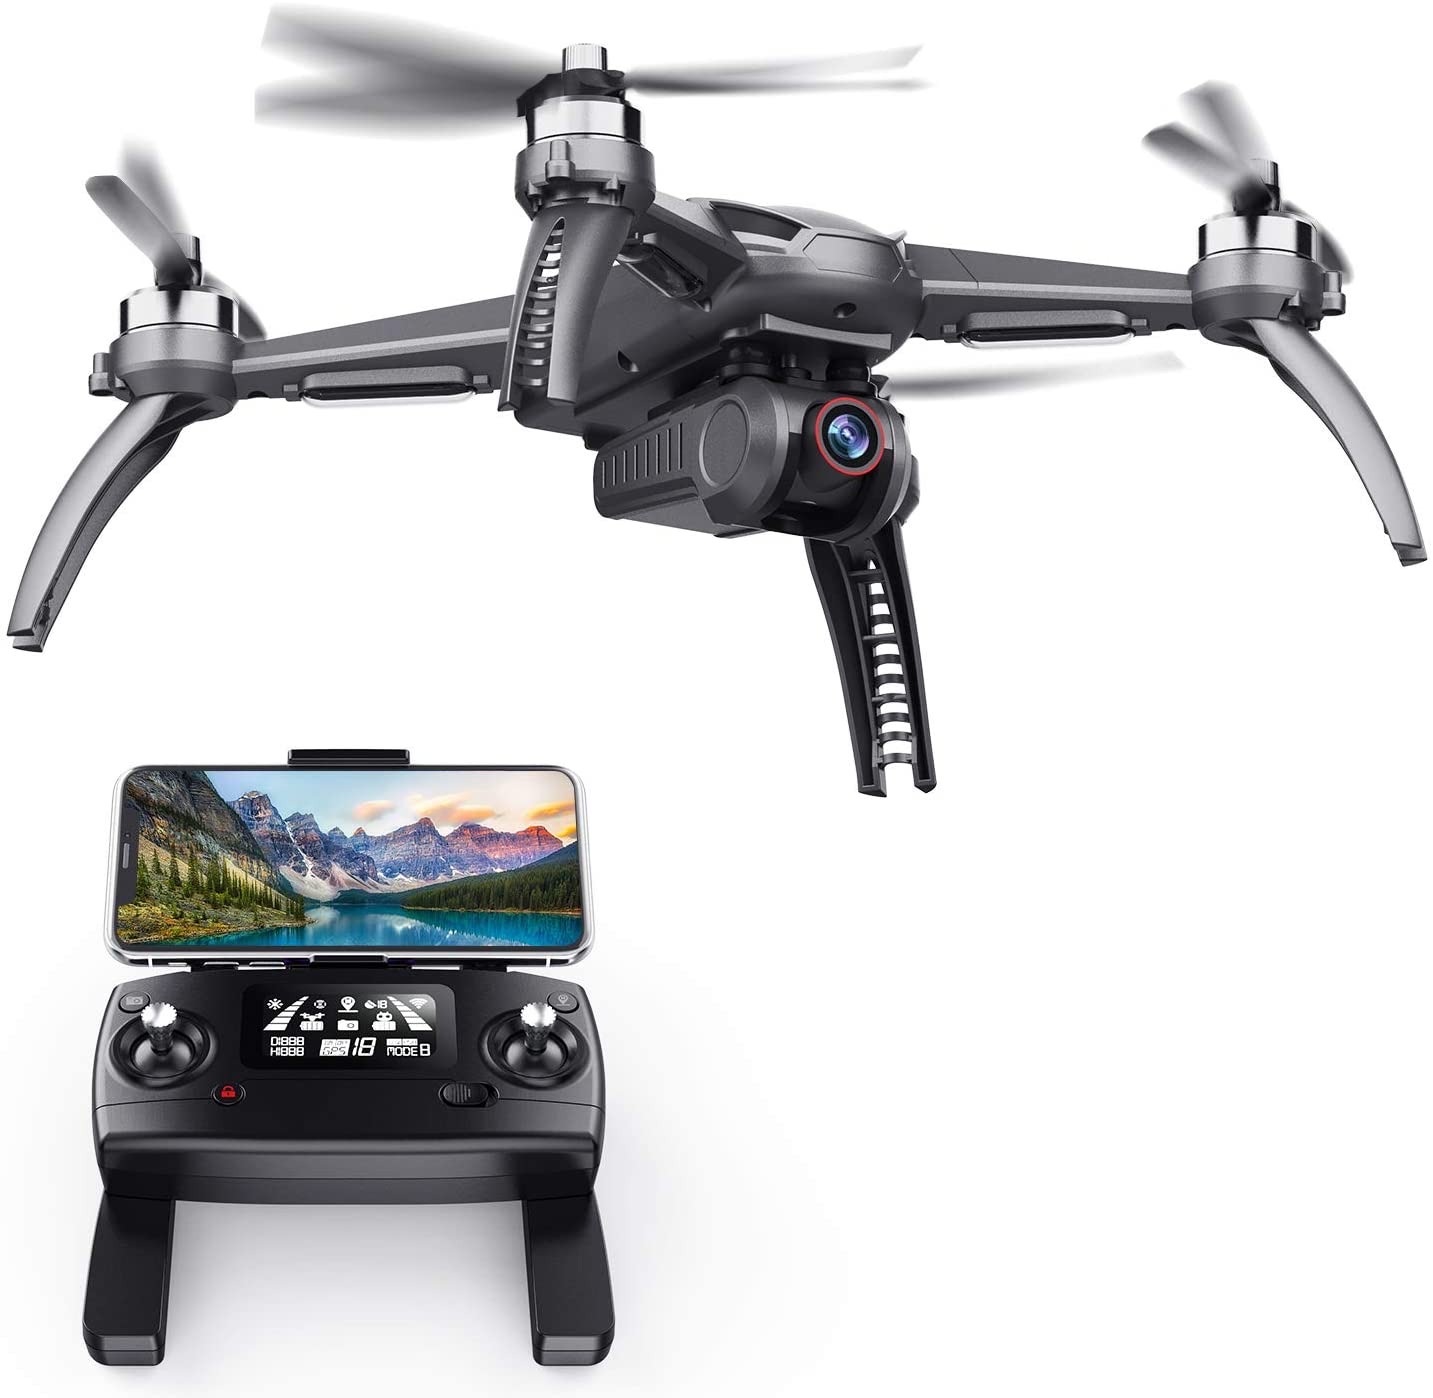 SANROCK B5W GPS Drone with 4K UHD Camera for Adults Kids Beginners, Quadcopter with Brushless Motor, 5GHz FPV Transmission, Auto Return Home, Long Range Control $119.99